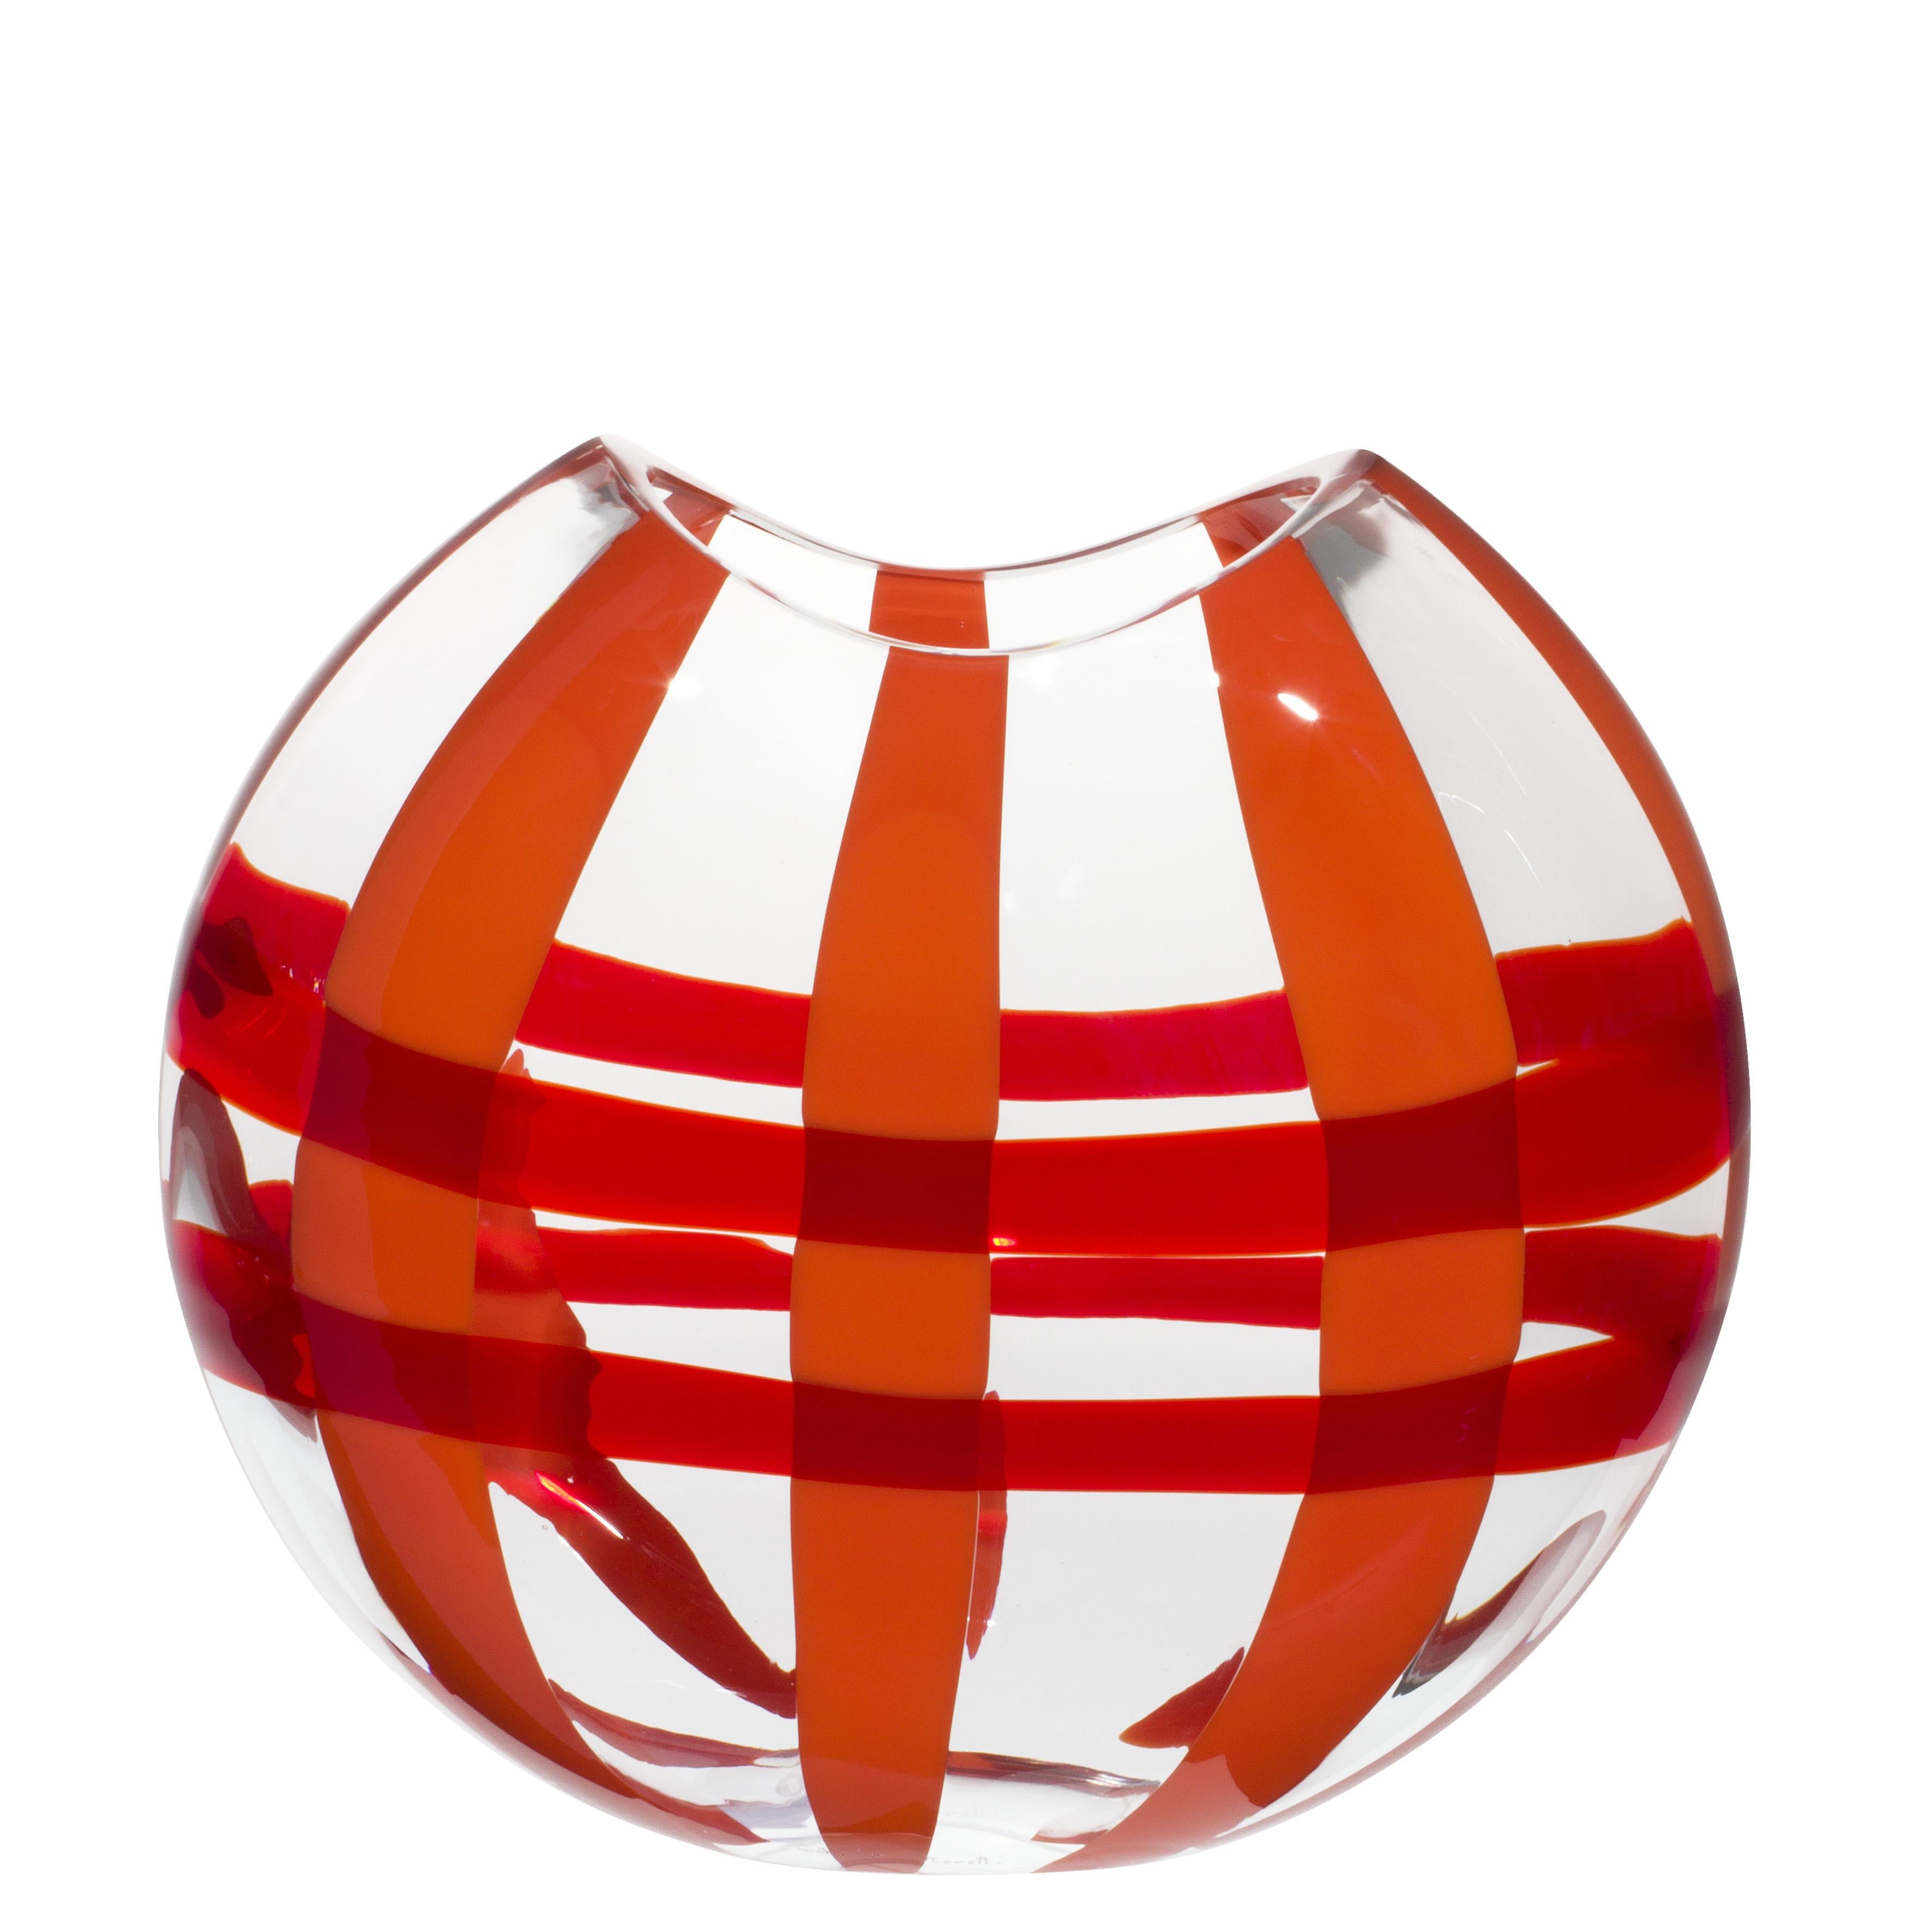 Small Eclissi Vase in Orange and Red by Carlo Moretti